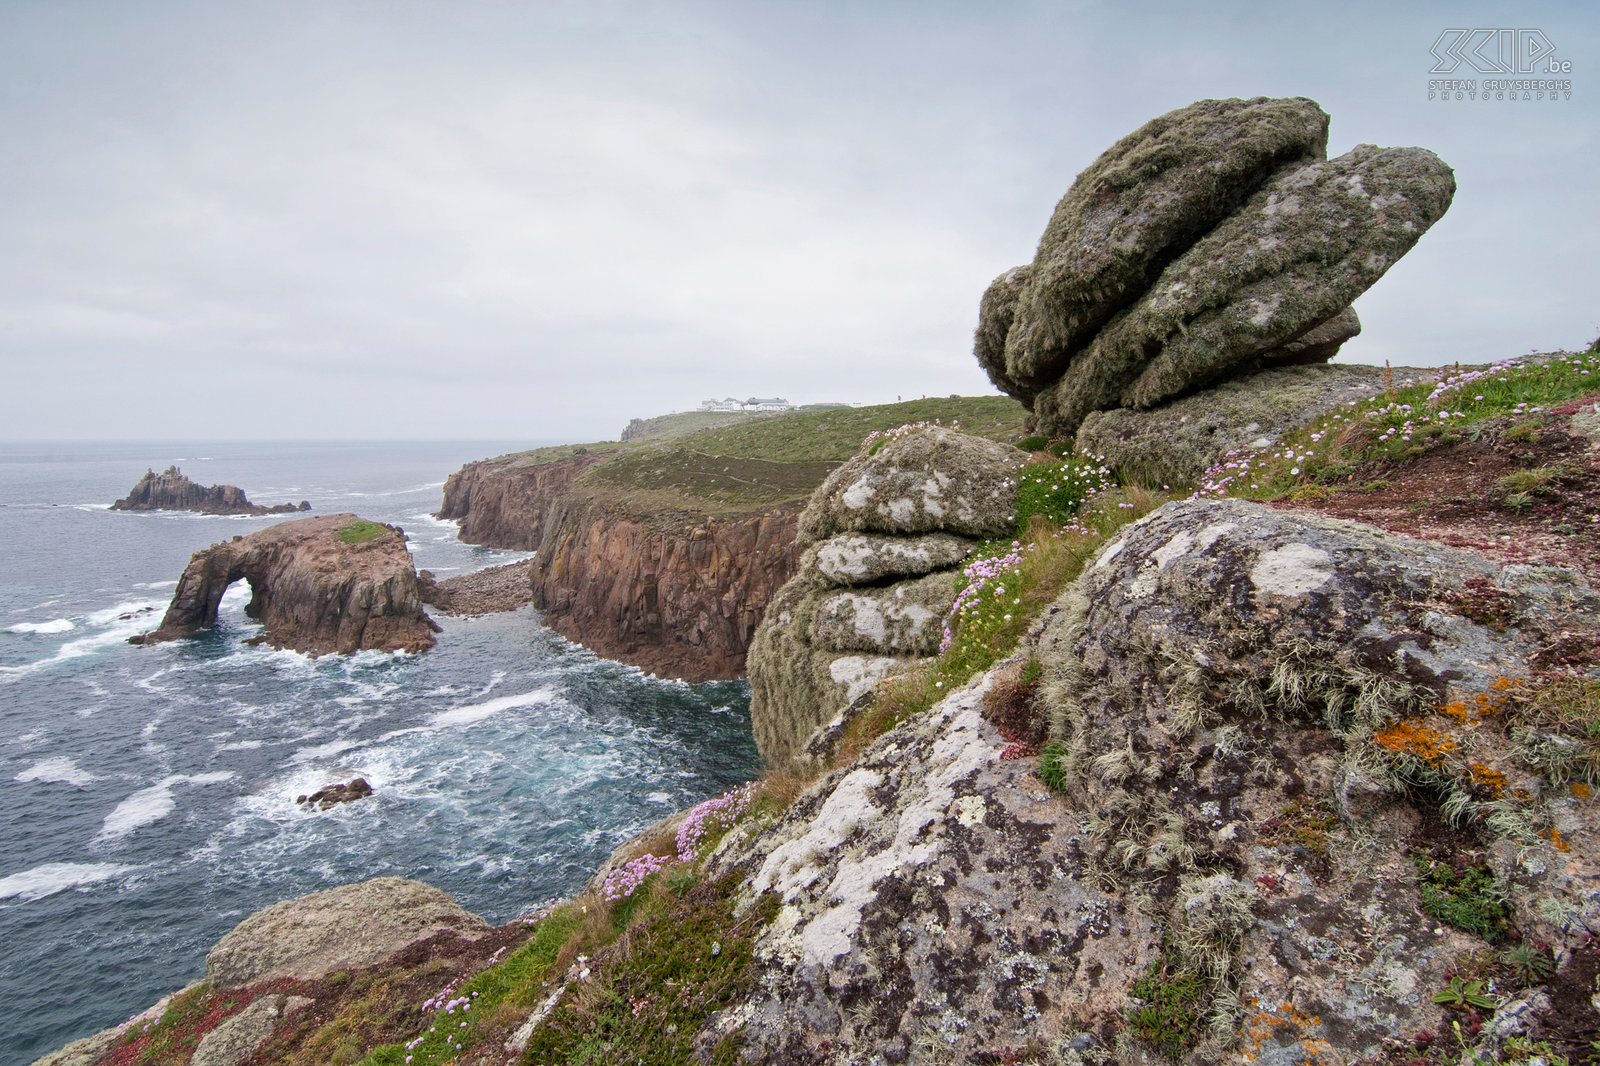 Land's End Land's End is the extreme westerly point on the mainland of England. It has some amazing cliffs and rock formations. Stefan Cruysberghs